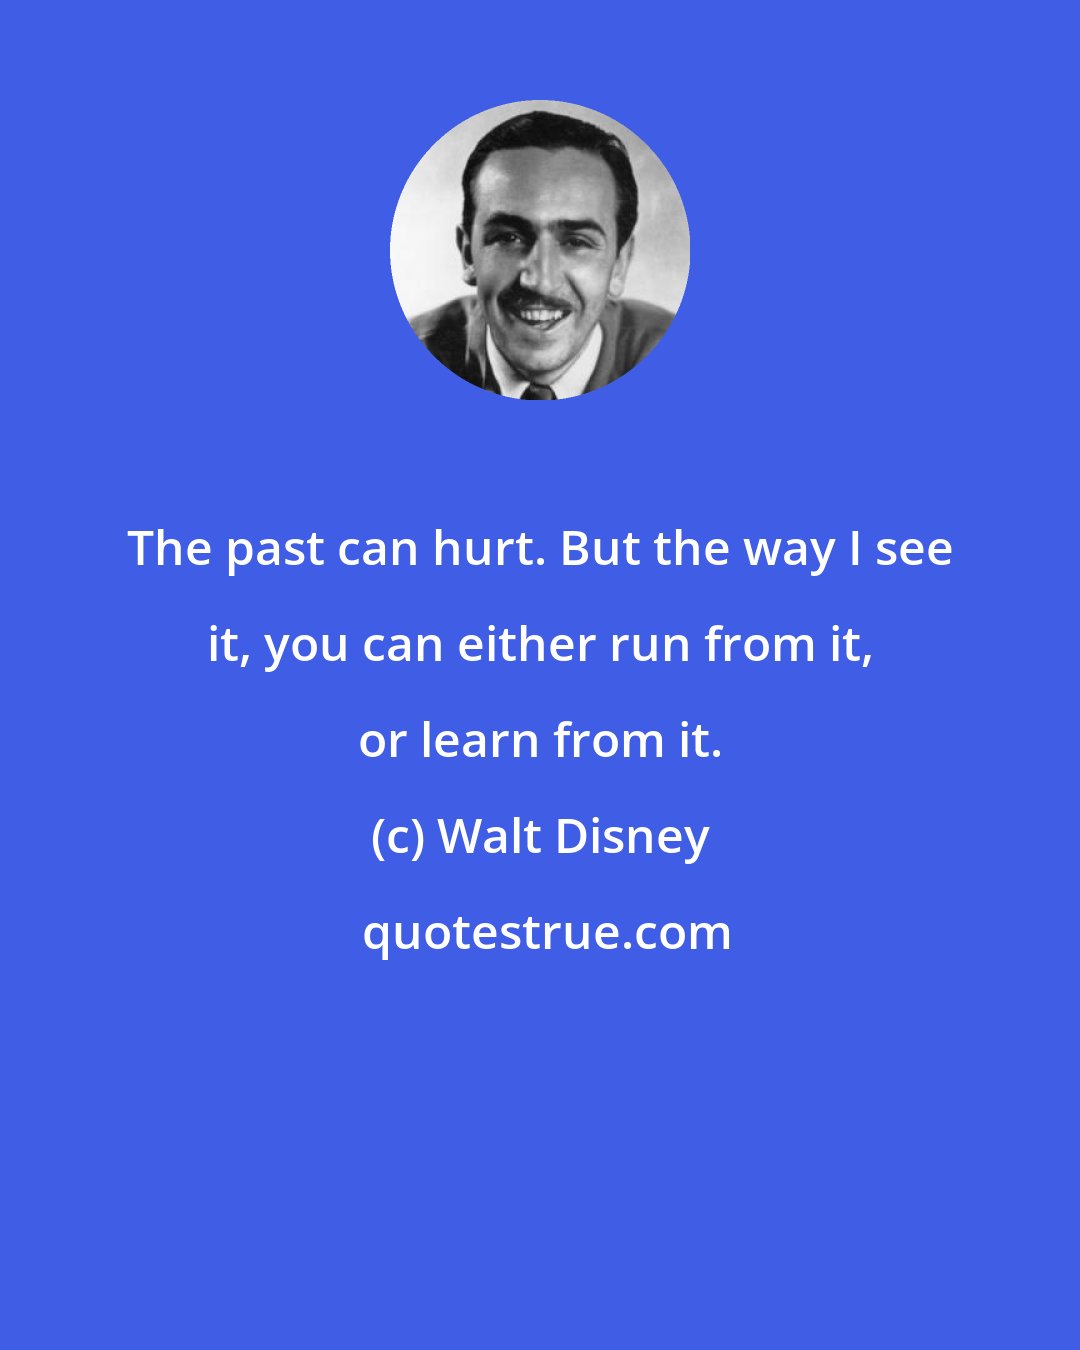 Walt Disney: The past can hurt. But the way I see it, you can either run from it, or learn from it.